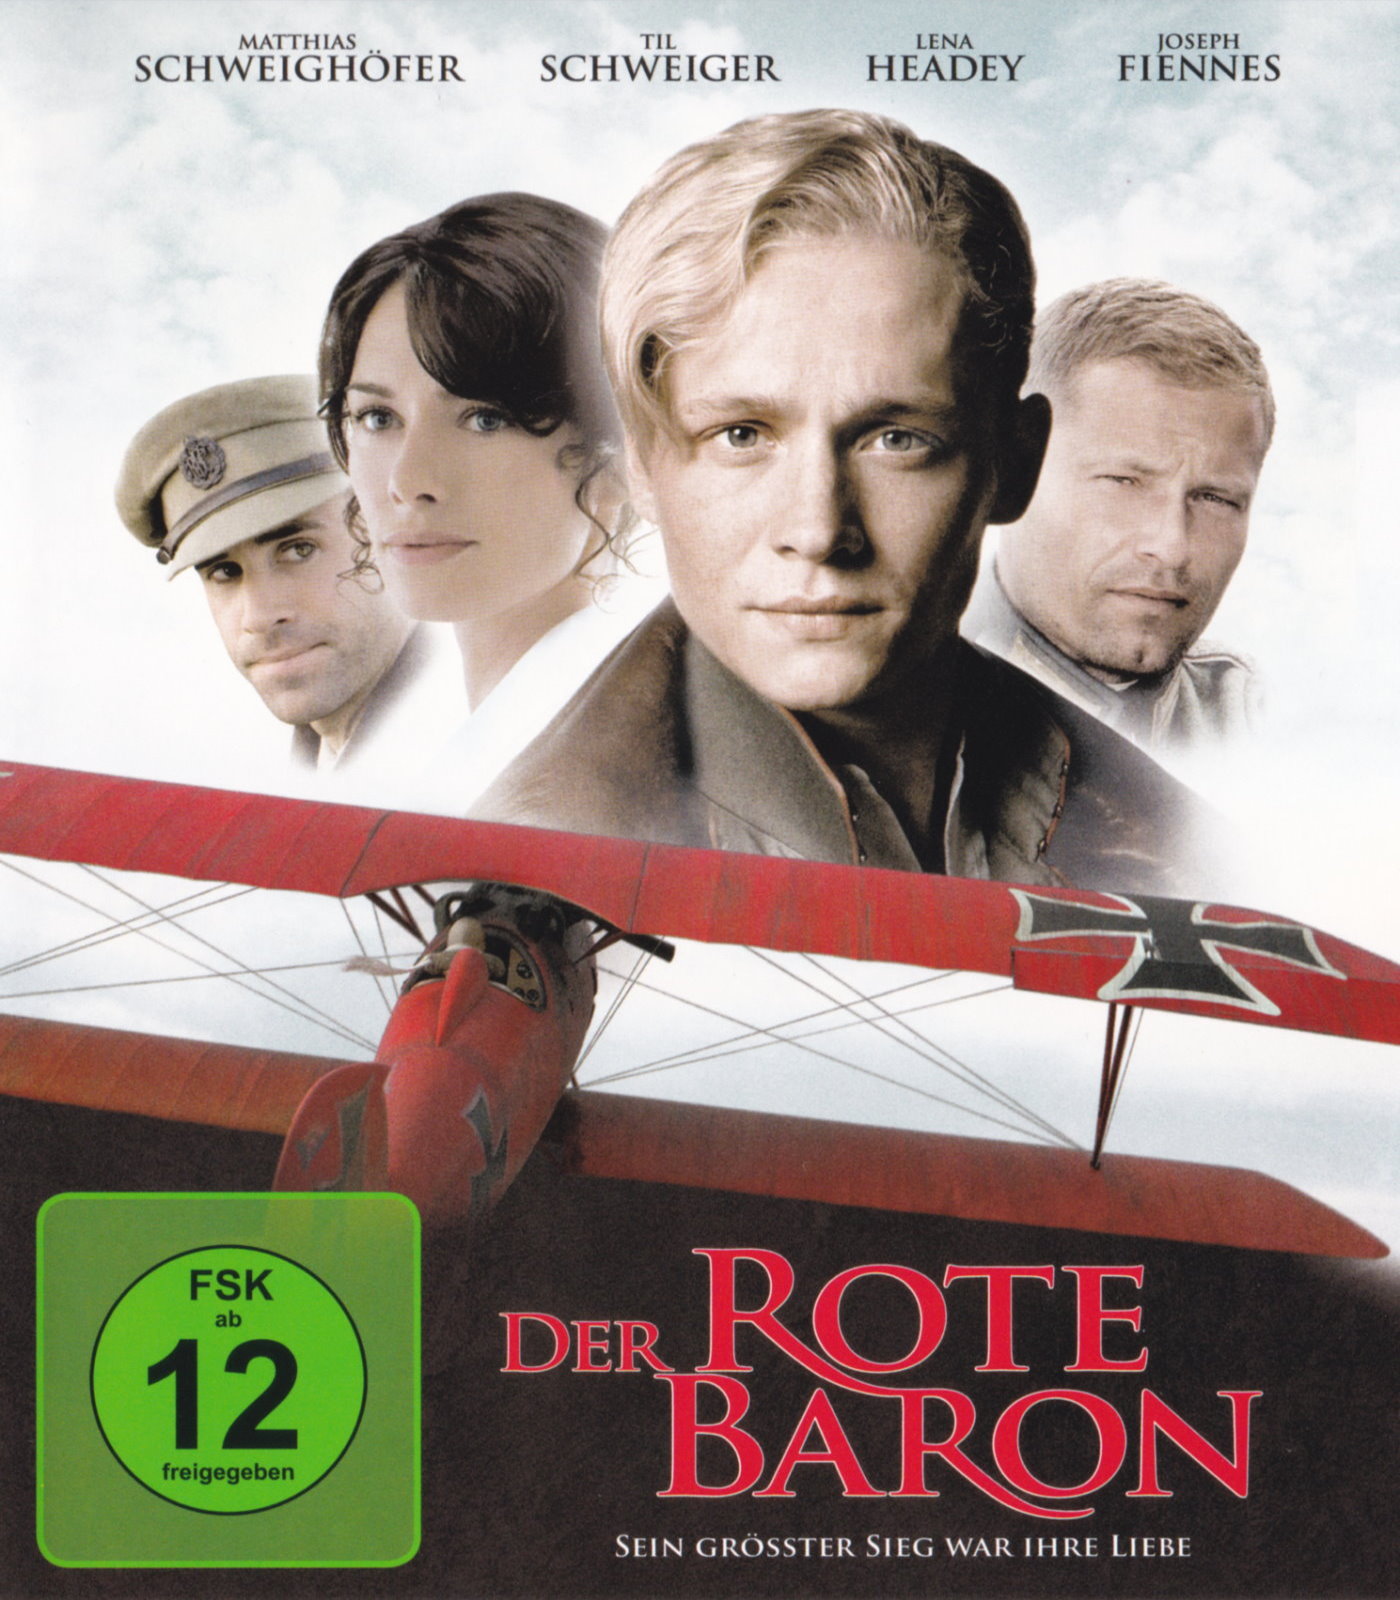 Cover - Der Rote Baron.jpg